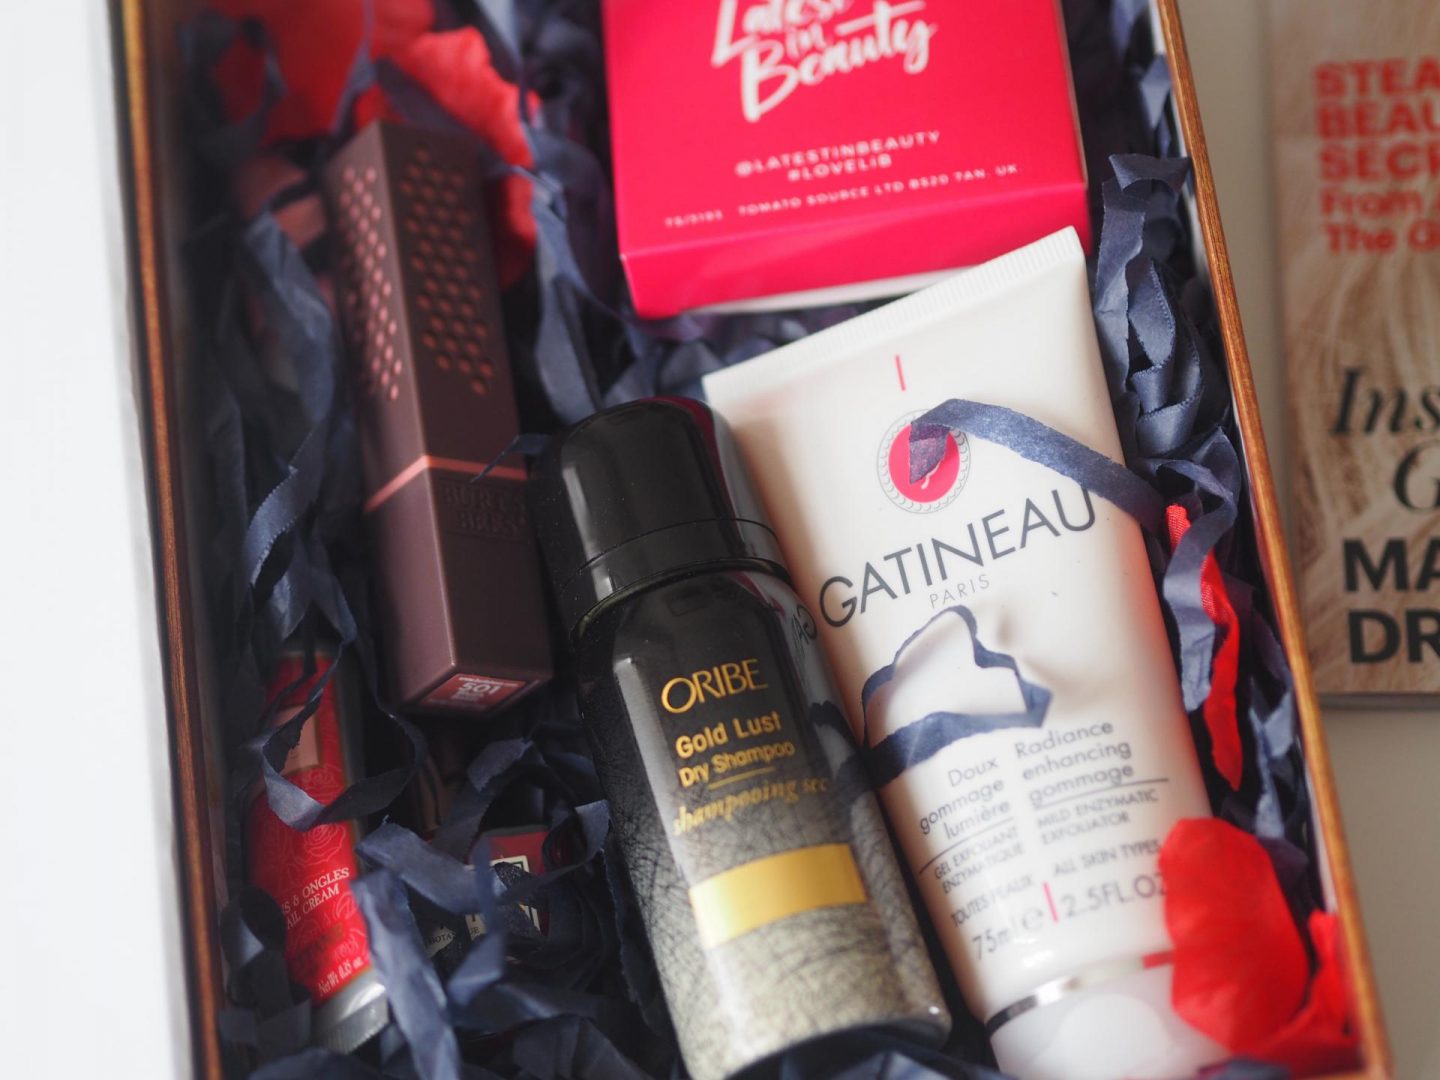 Latest in Beauty The Beauty and the Beast Box